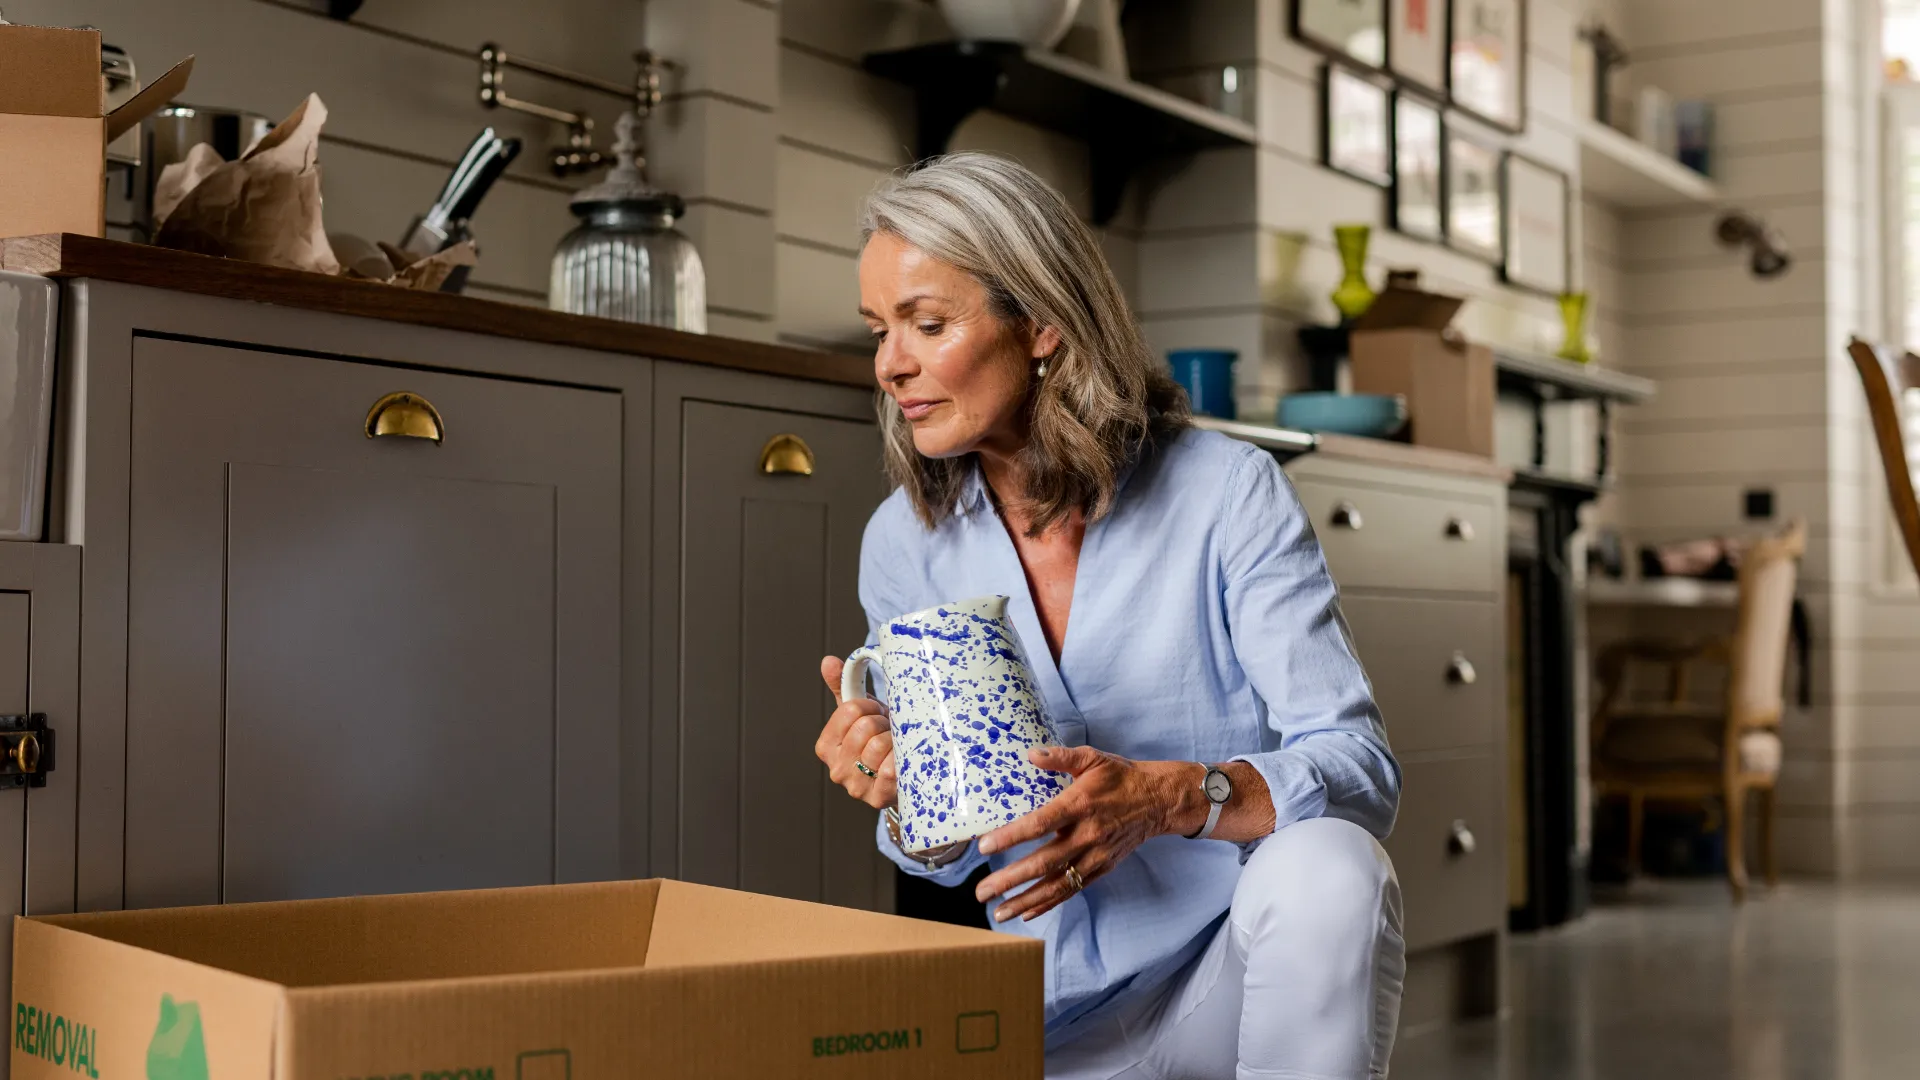 woman packing a jug in kitchen